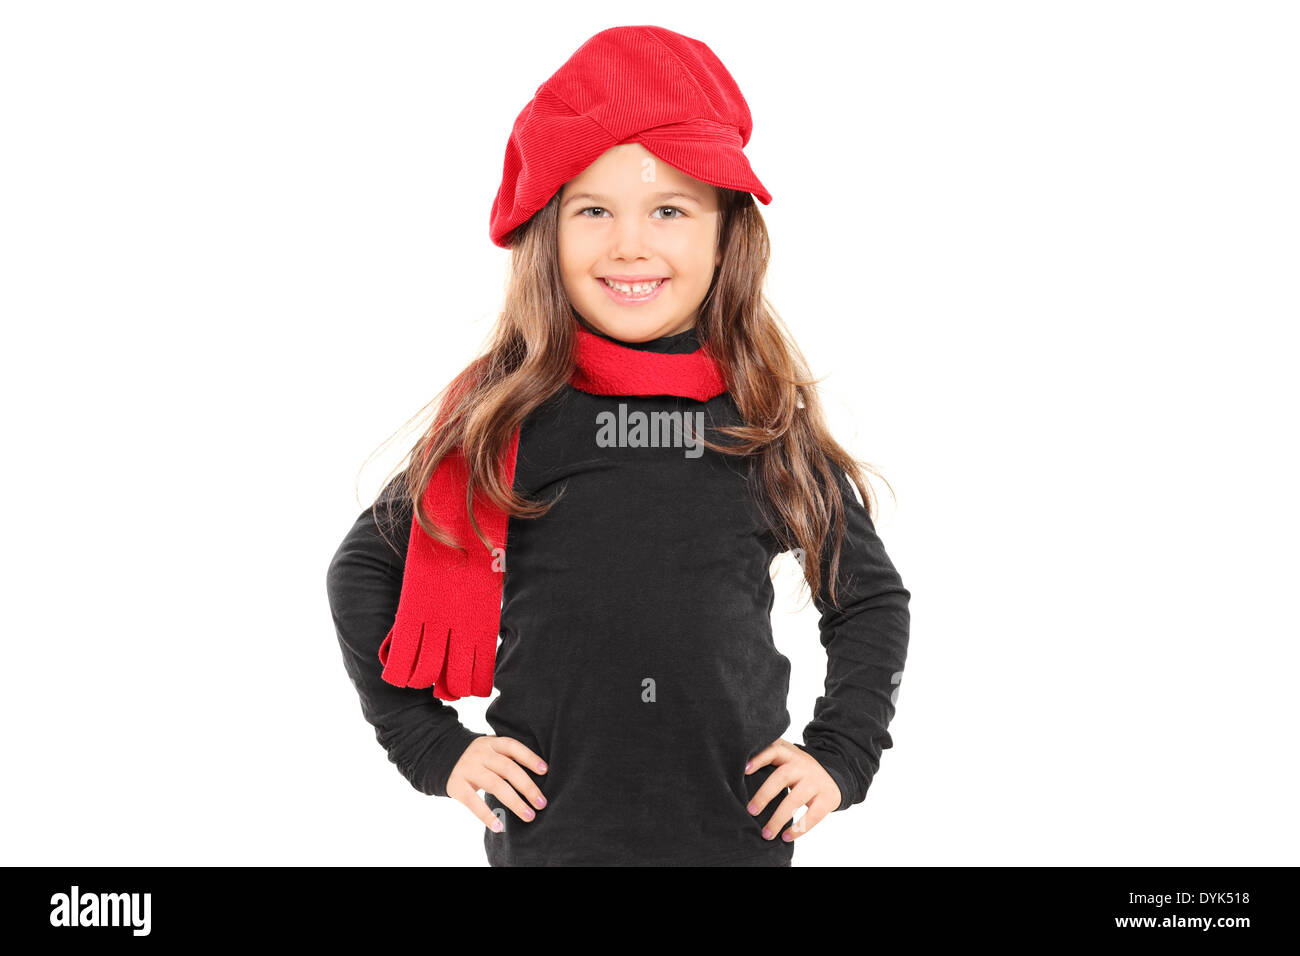 Fashionable little girl with red beret Stock Photo